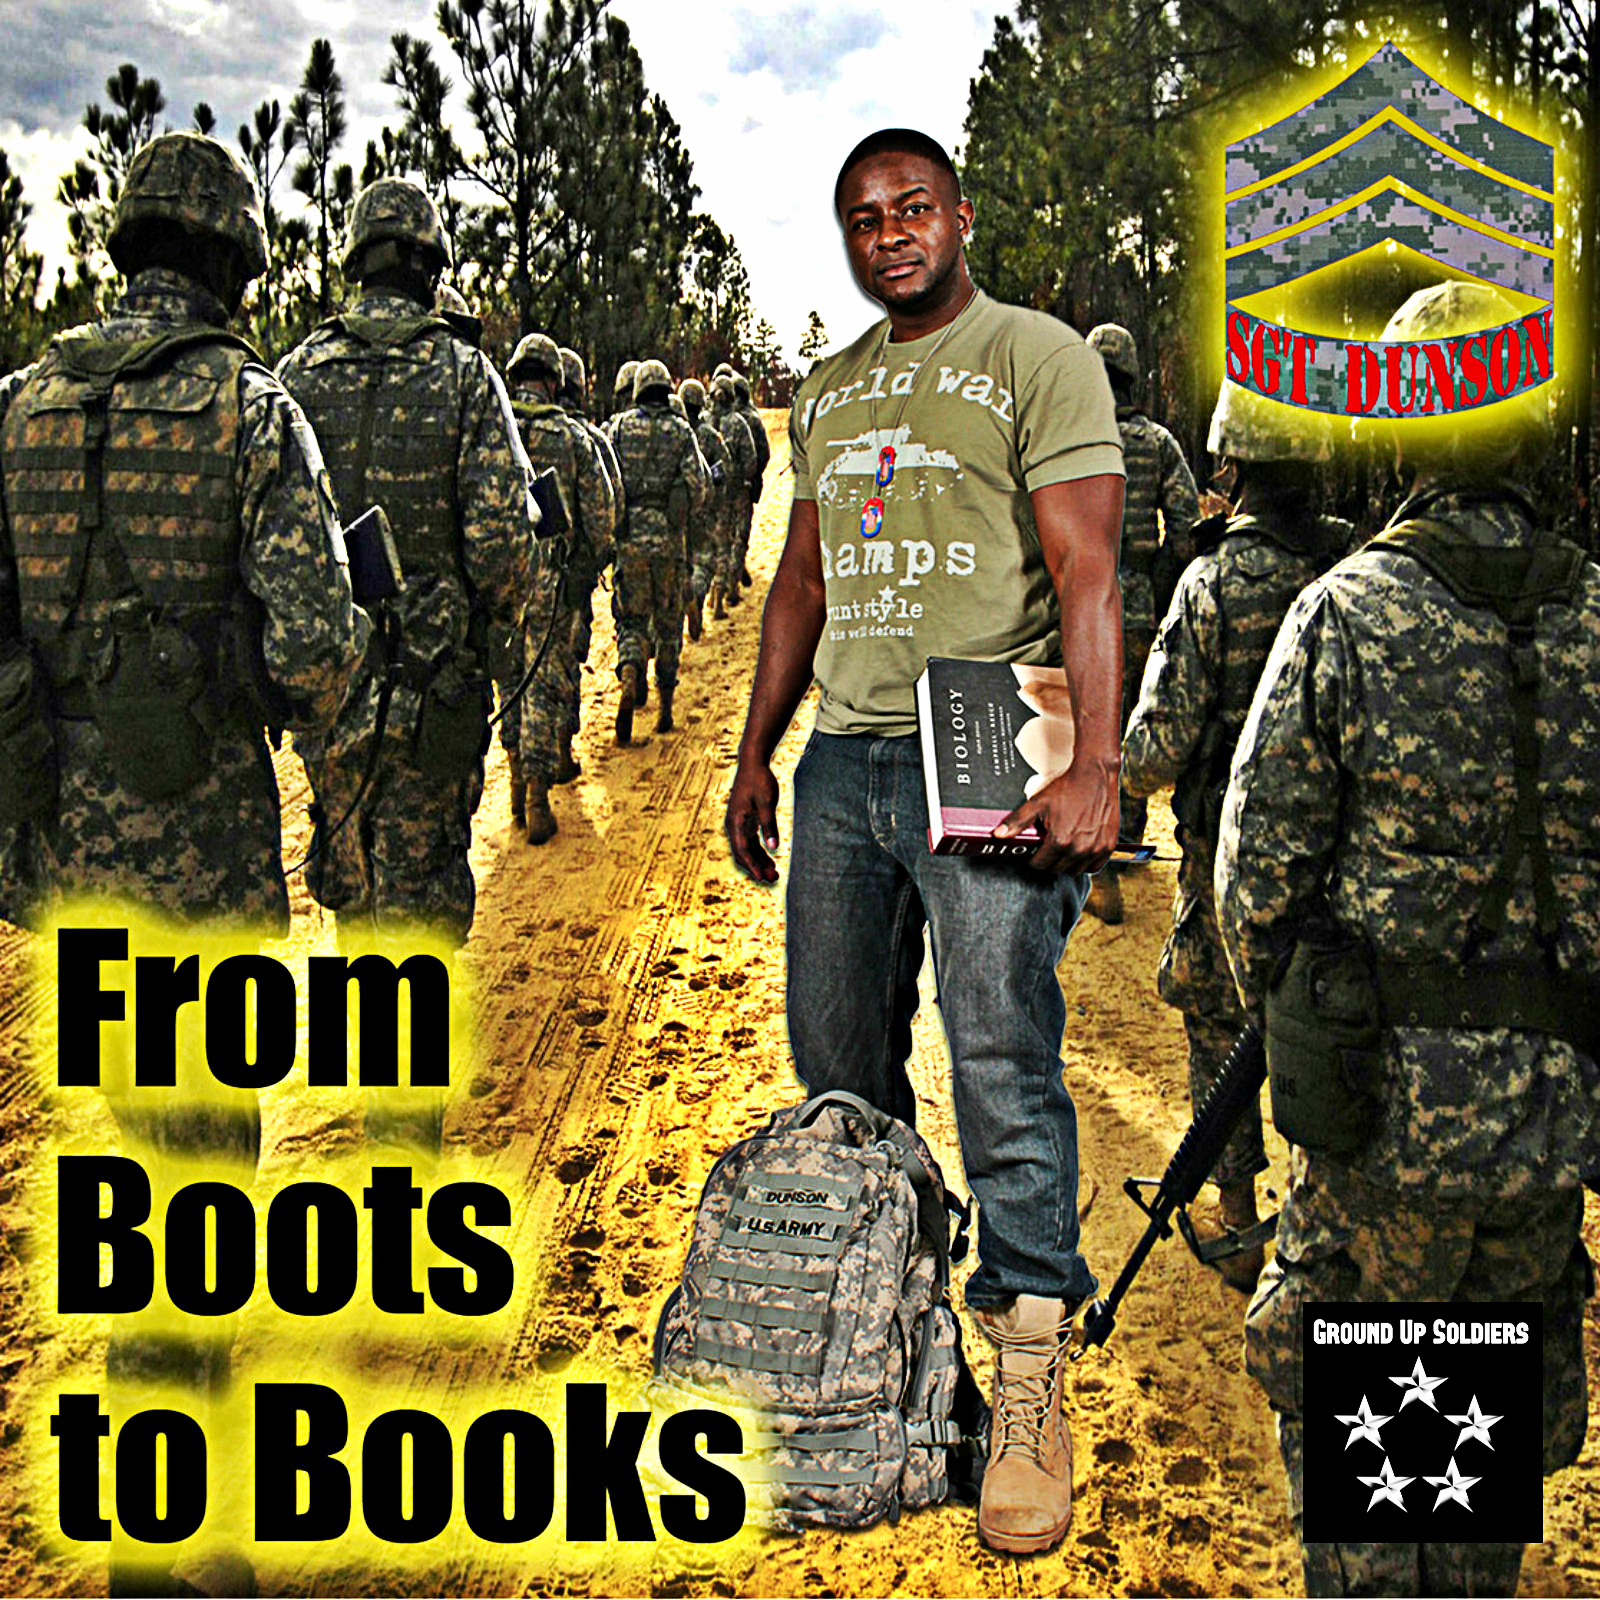 From boots to books